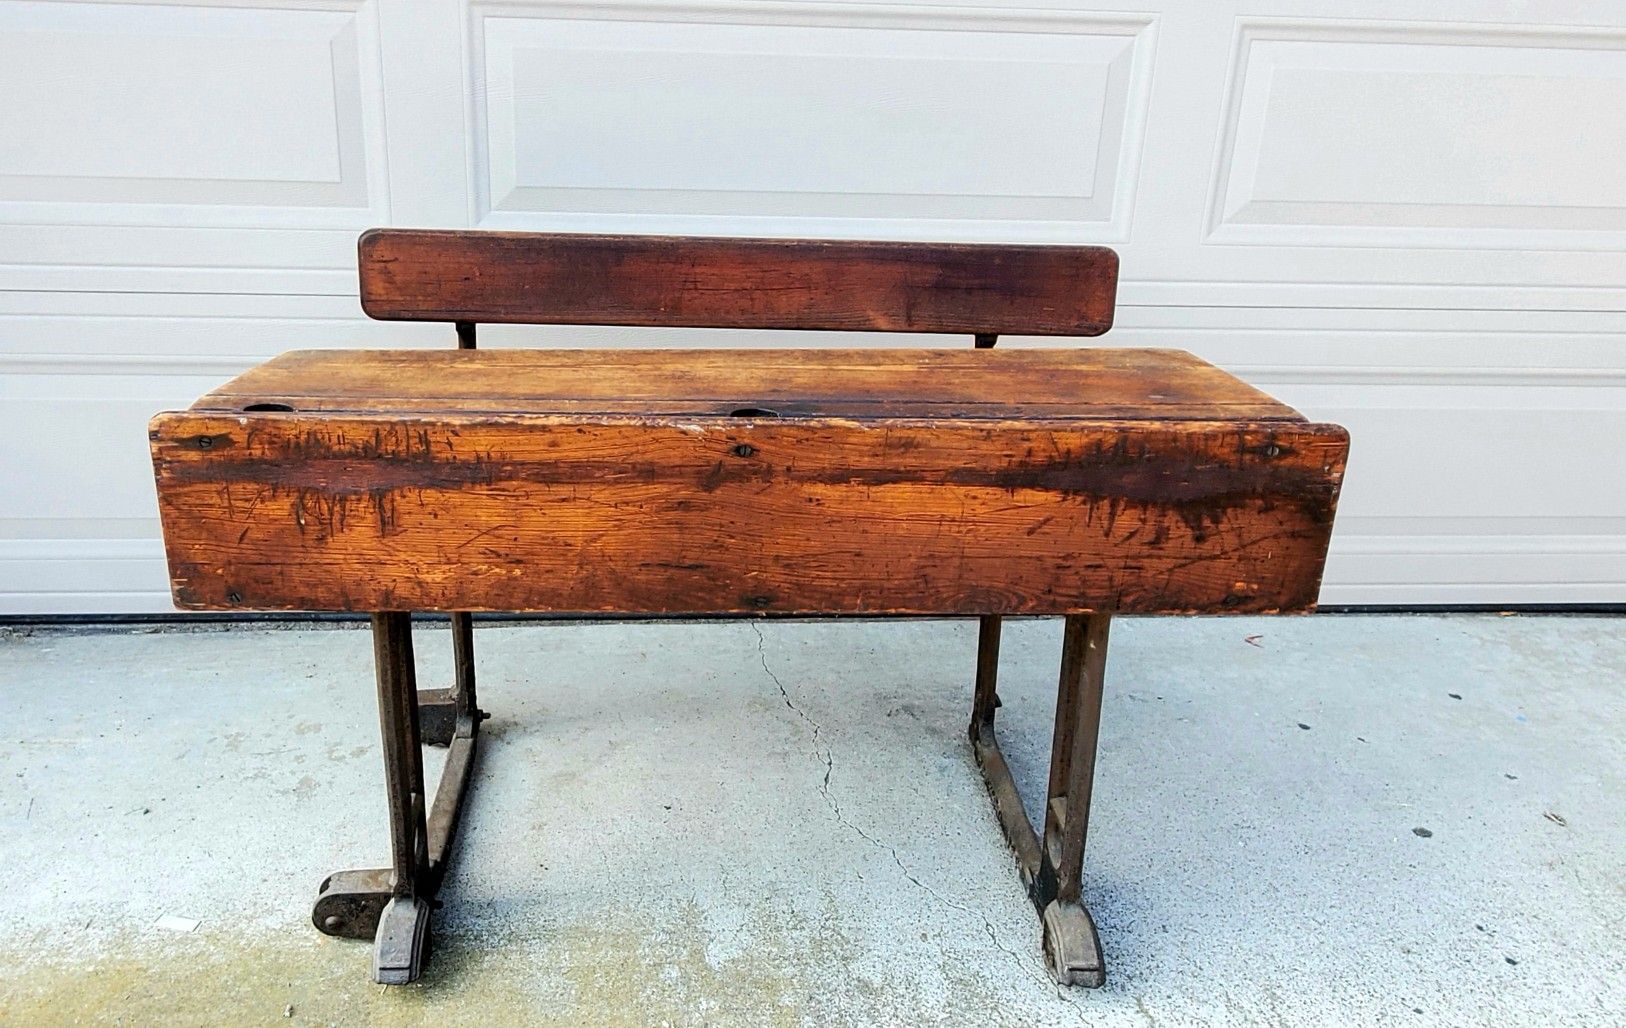 Antique School desk, County Borough of Ruby Education Committee